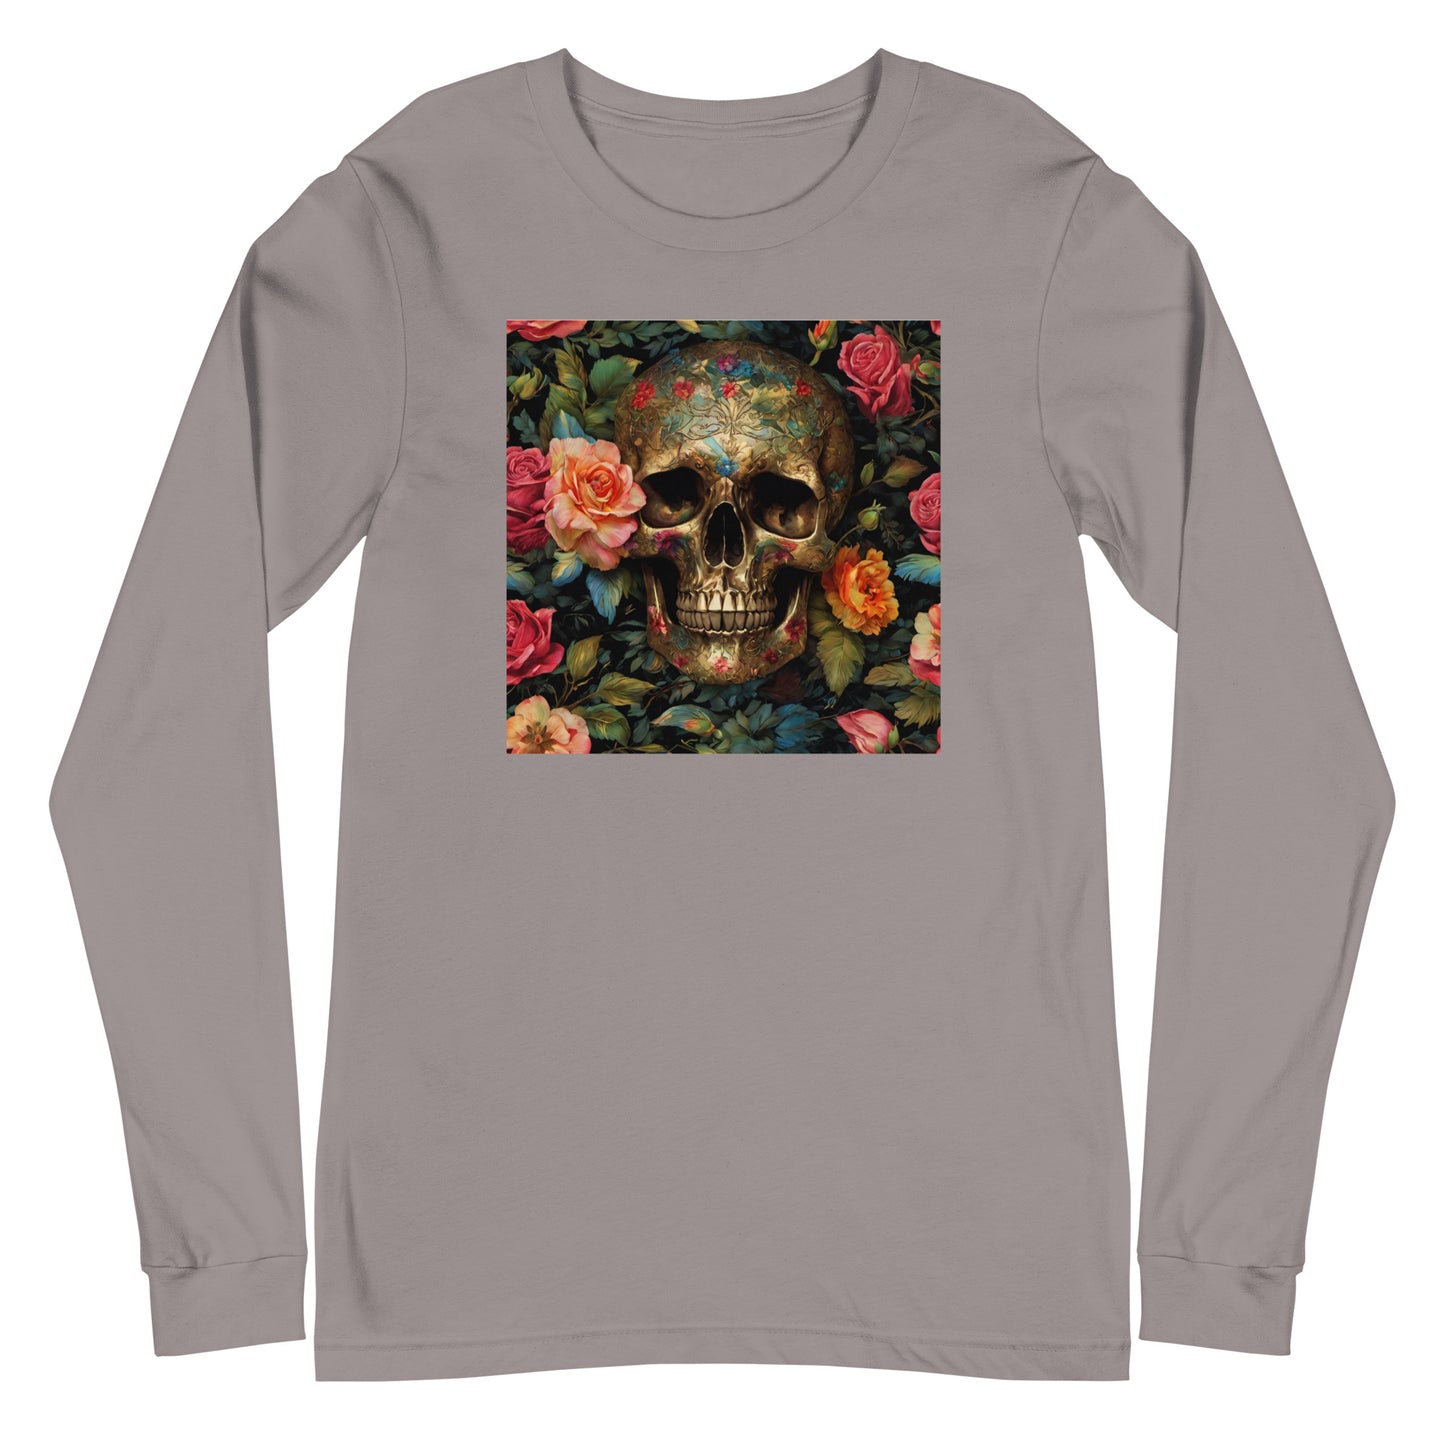 Skull and Roses Graphic Long Sleeve Tee Storm